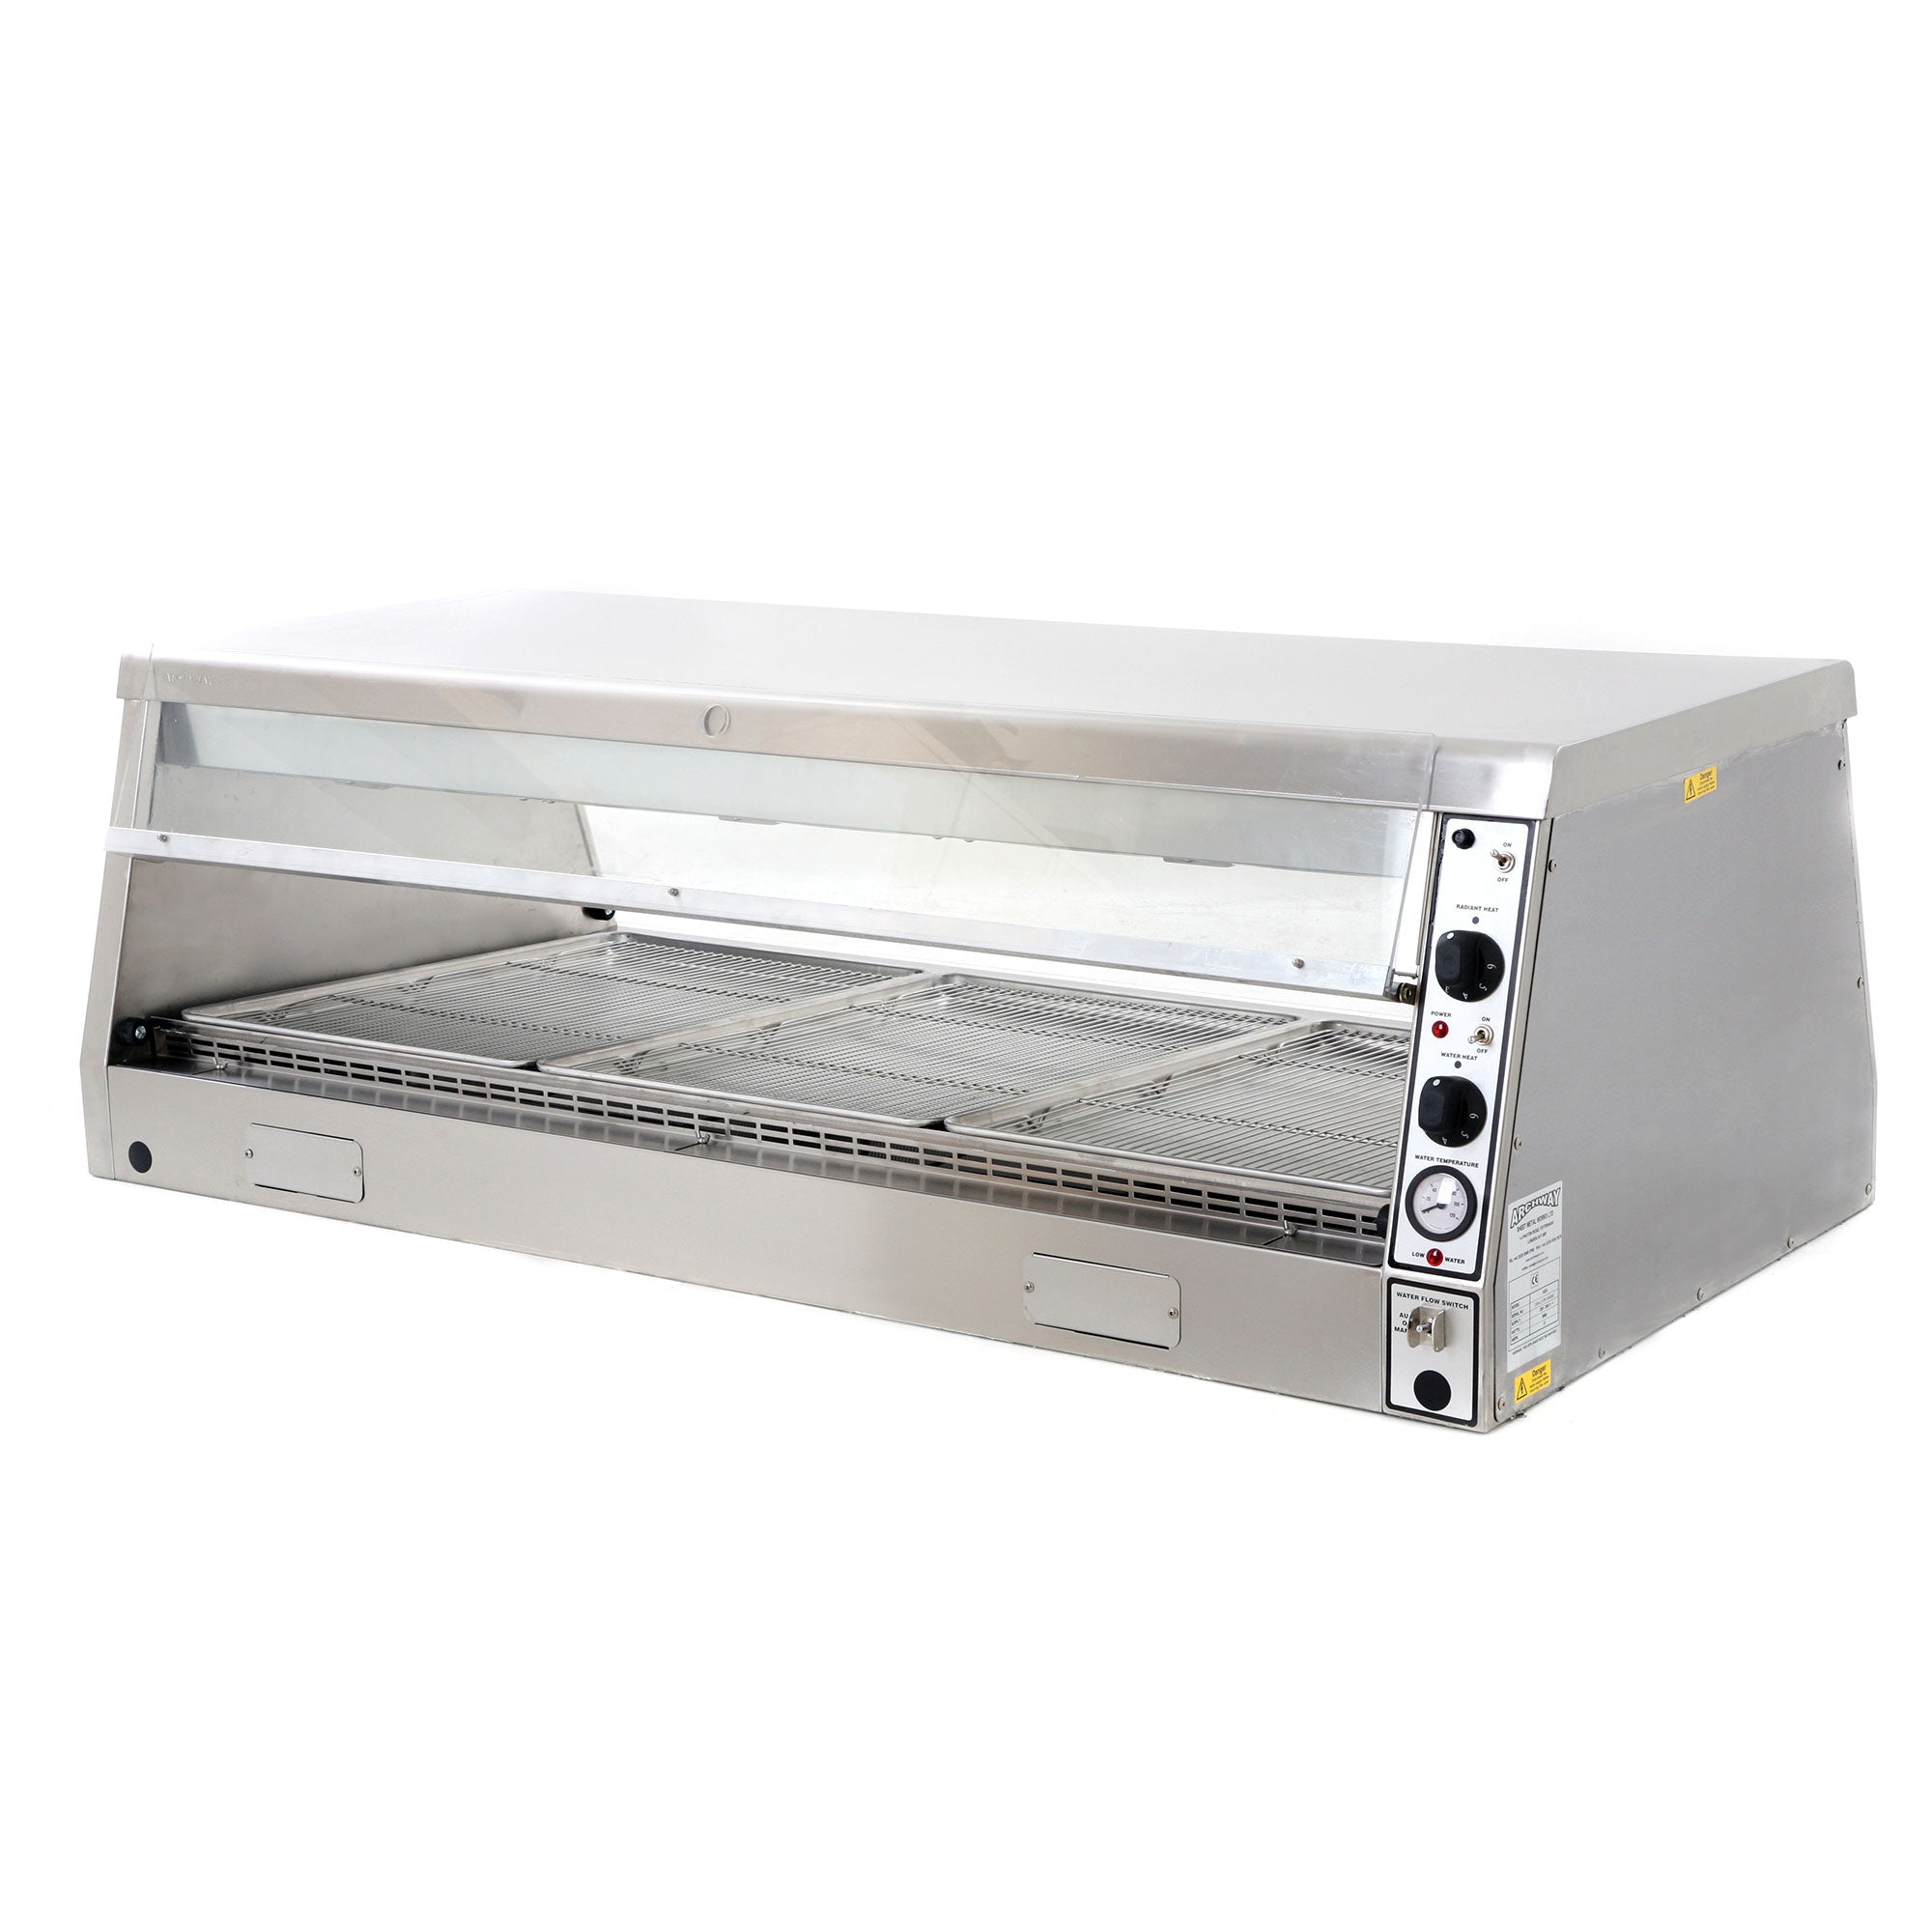 ARCHWAY Heated Chicken Display – 3 Pans.Product ref:00450.MODEL:HD3.🚚 4-6 Weeks Delivery